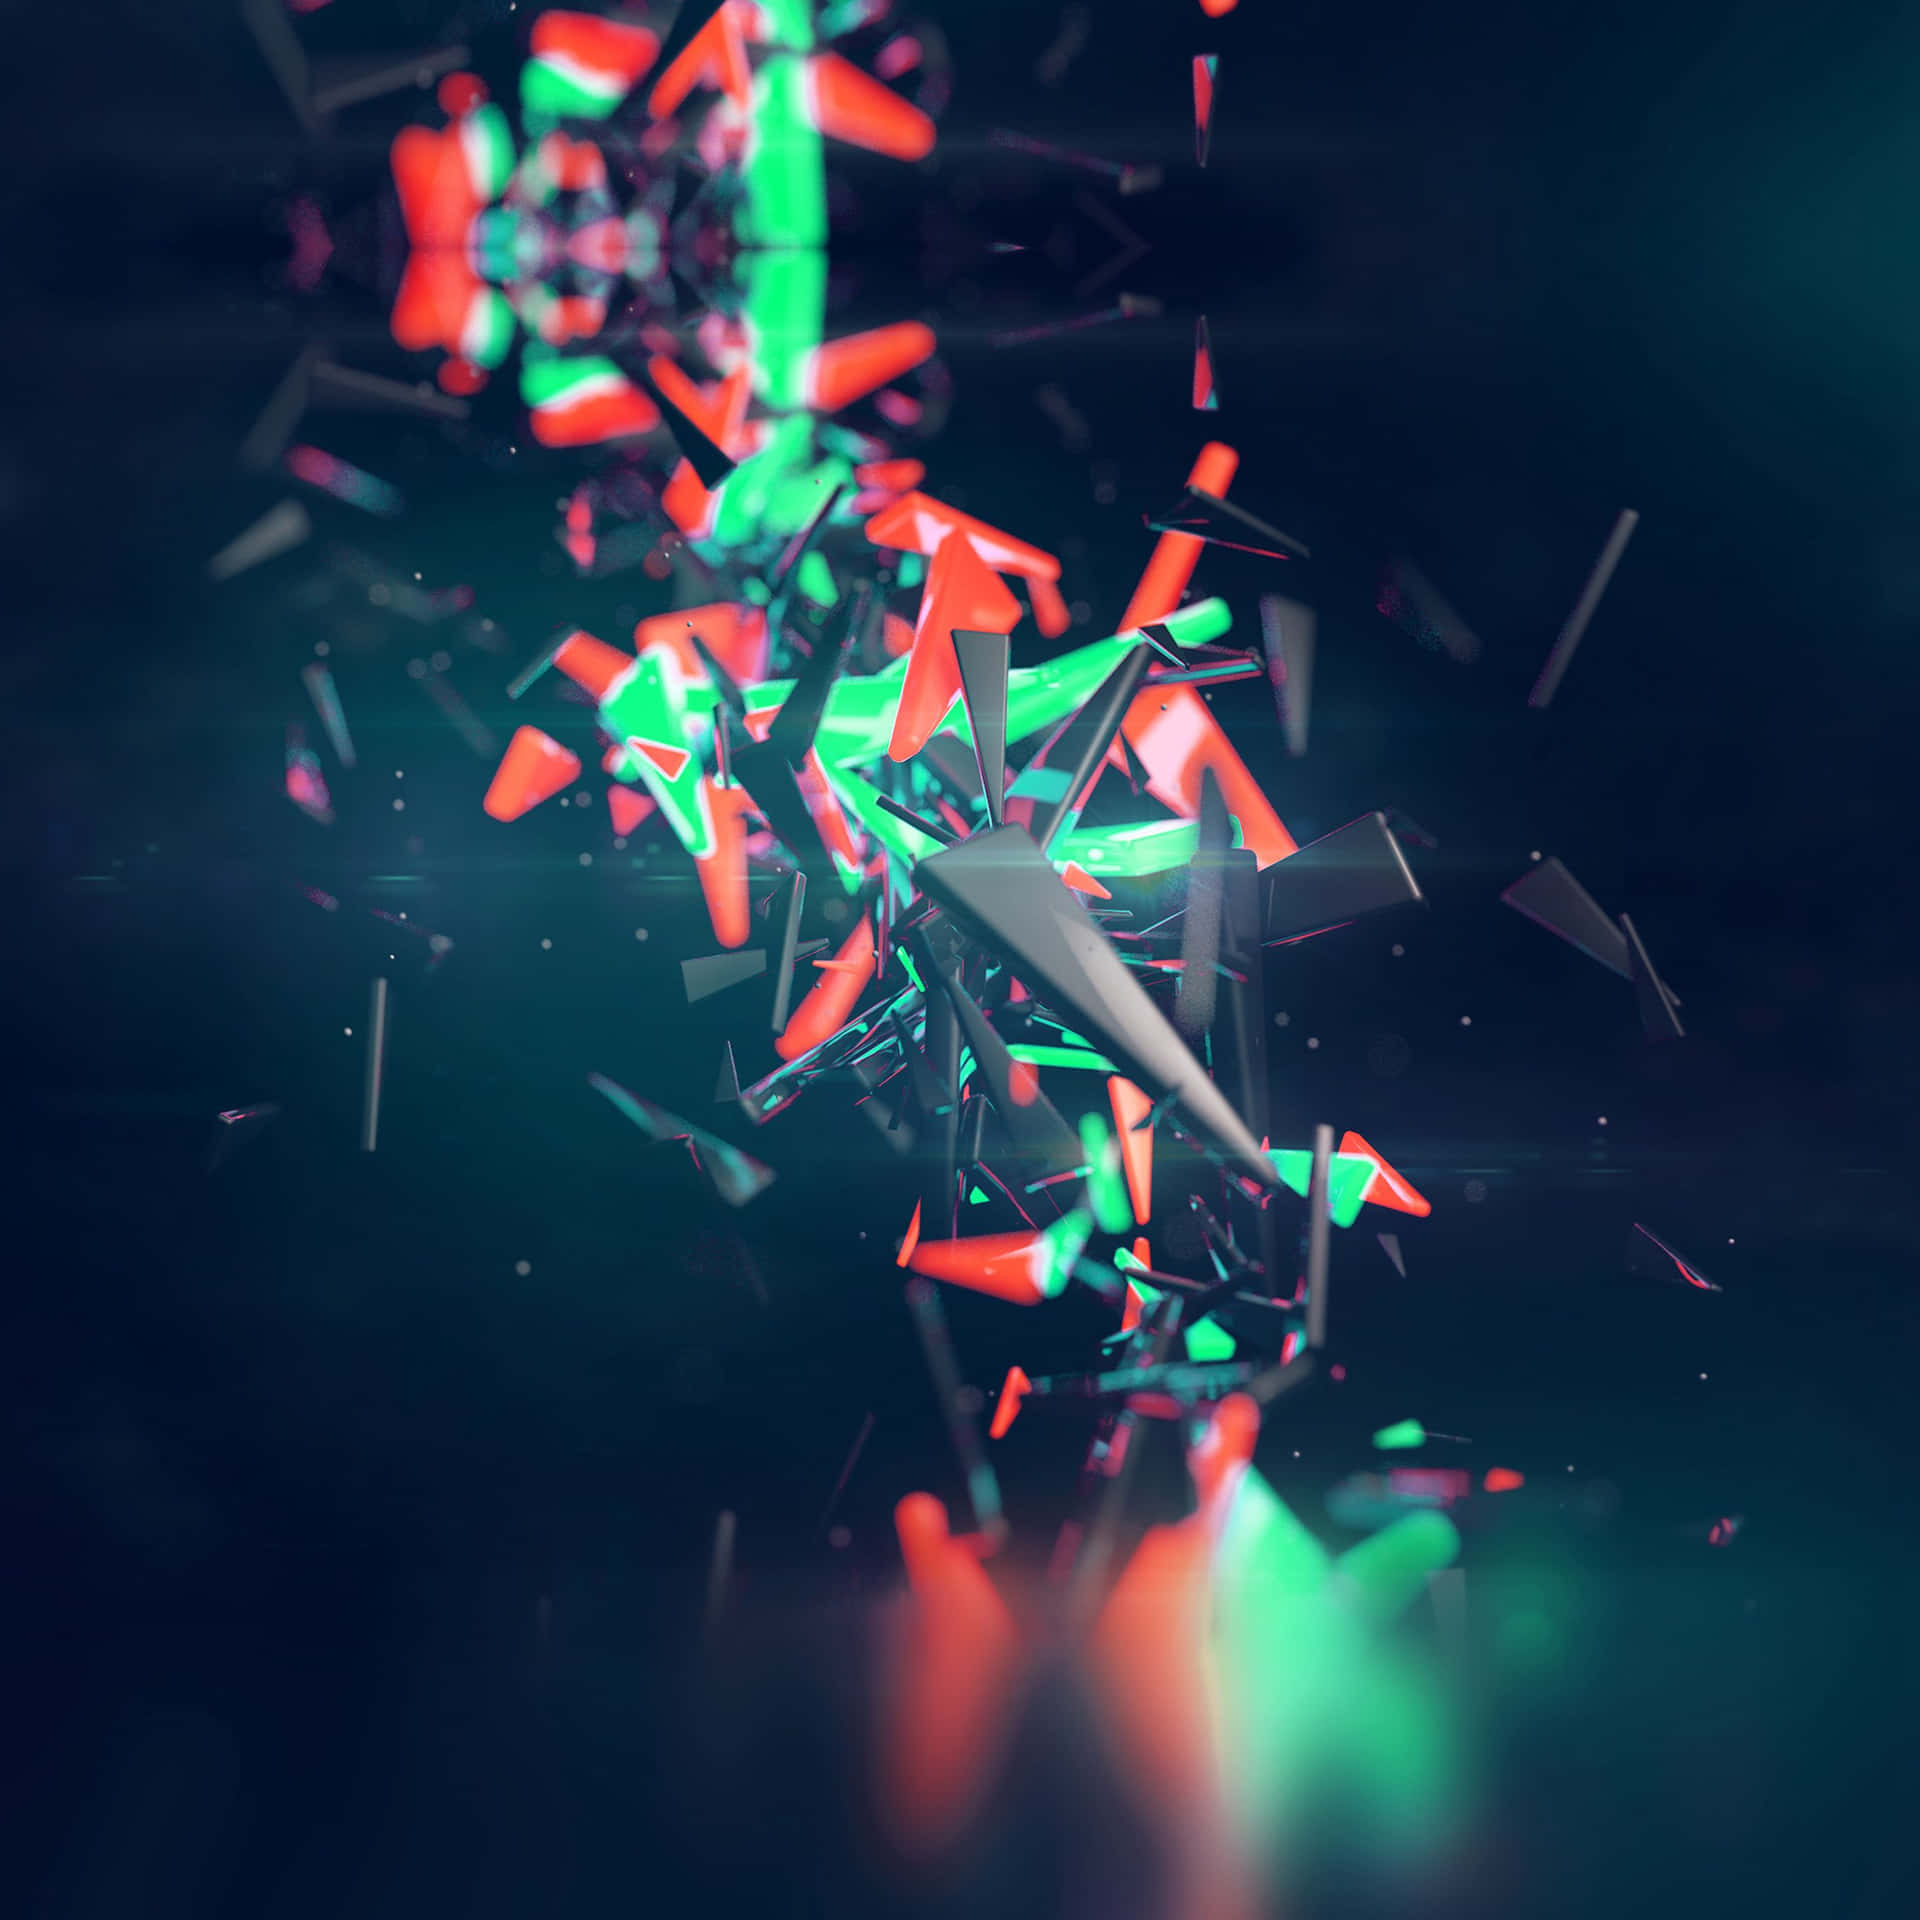 A Colorful Abstract Image Of A Broken Glass Wallpaper